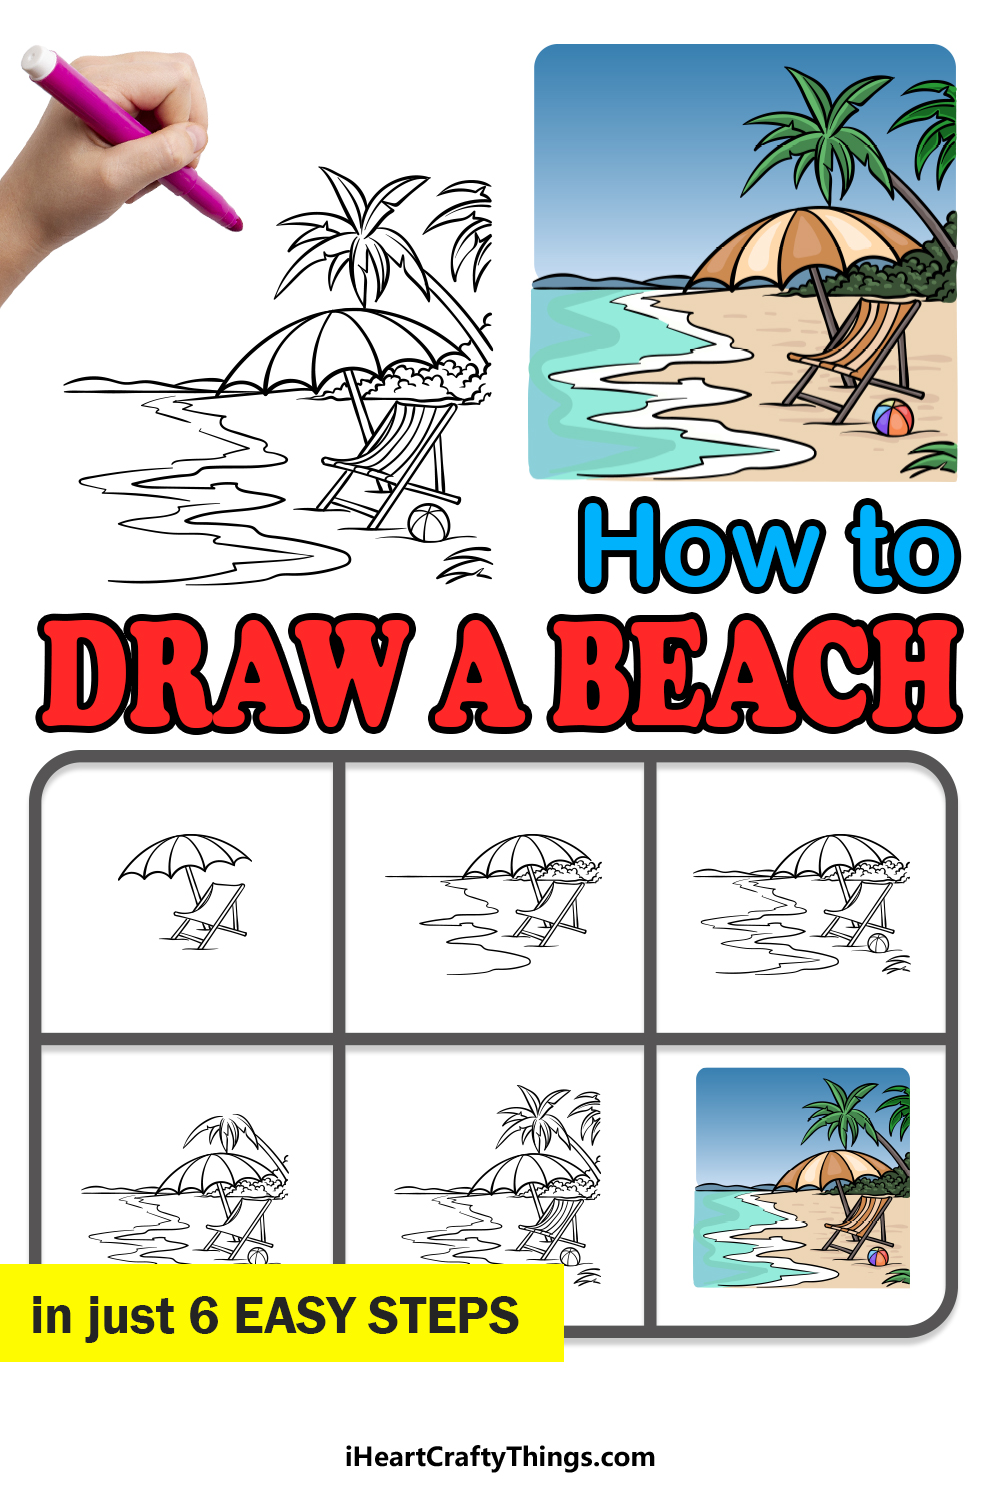 how to draw a Beach in 6 easy steps